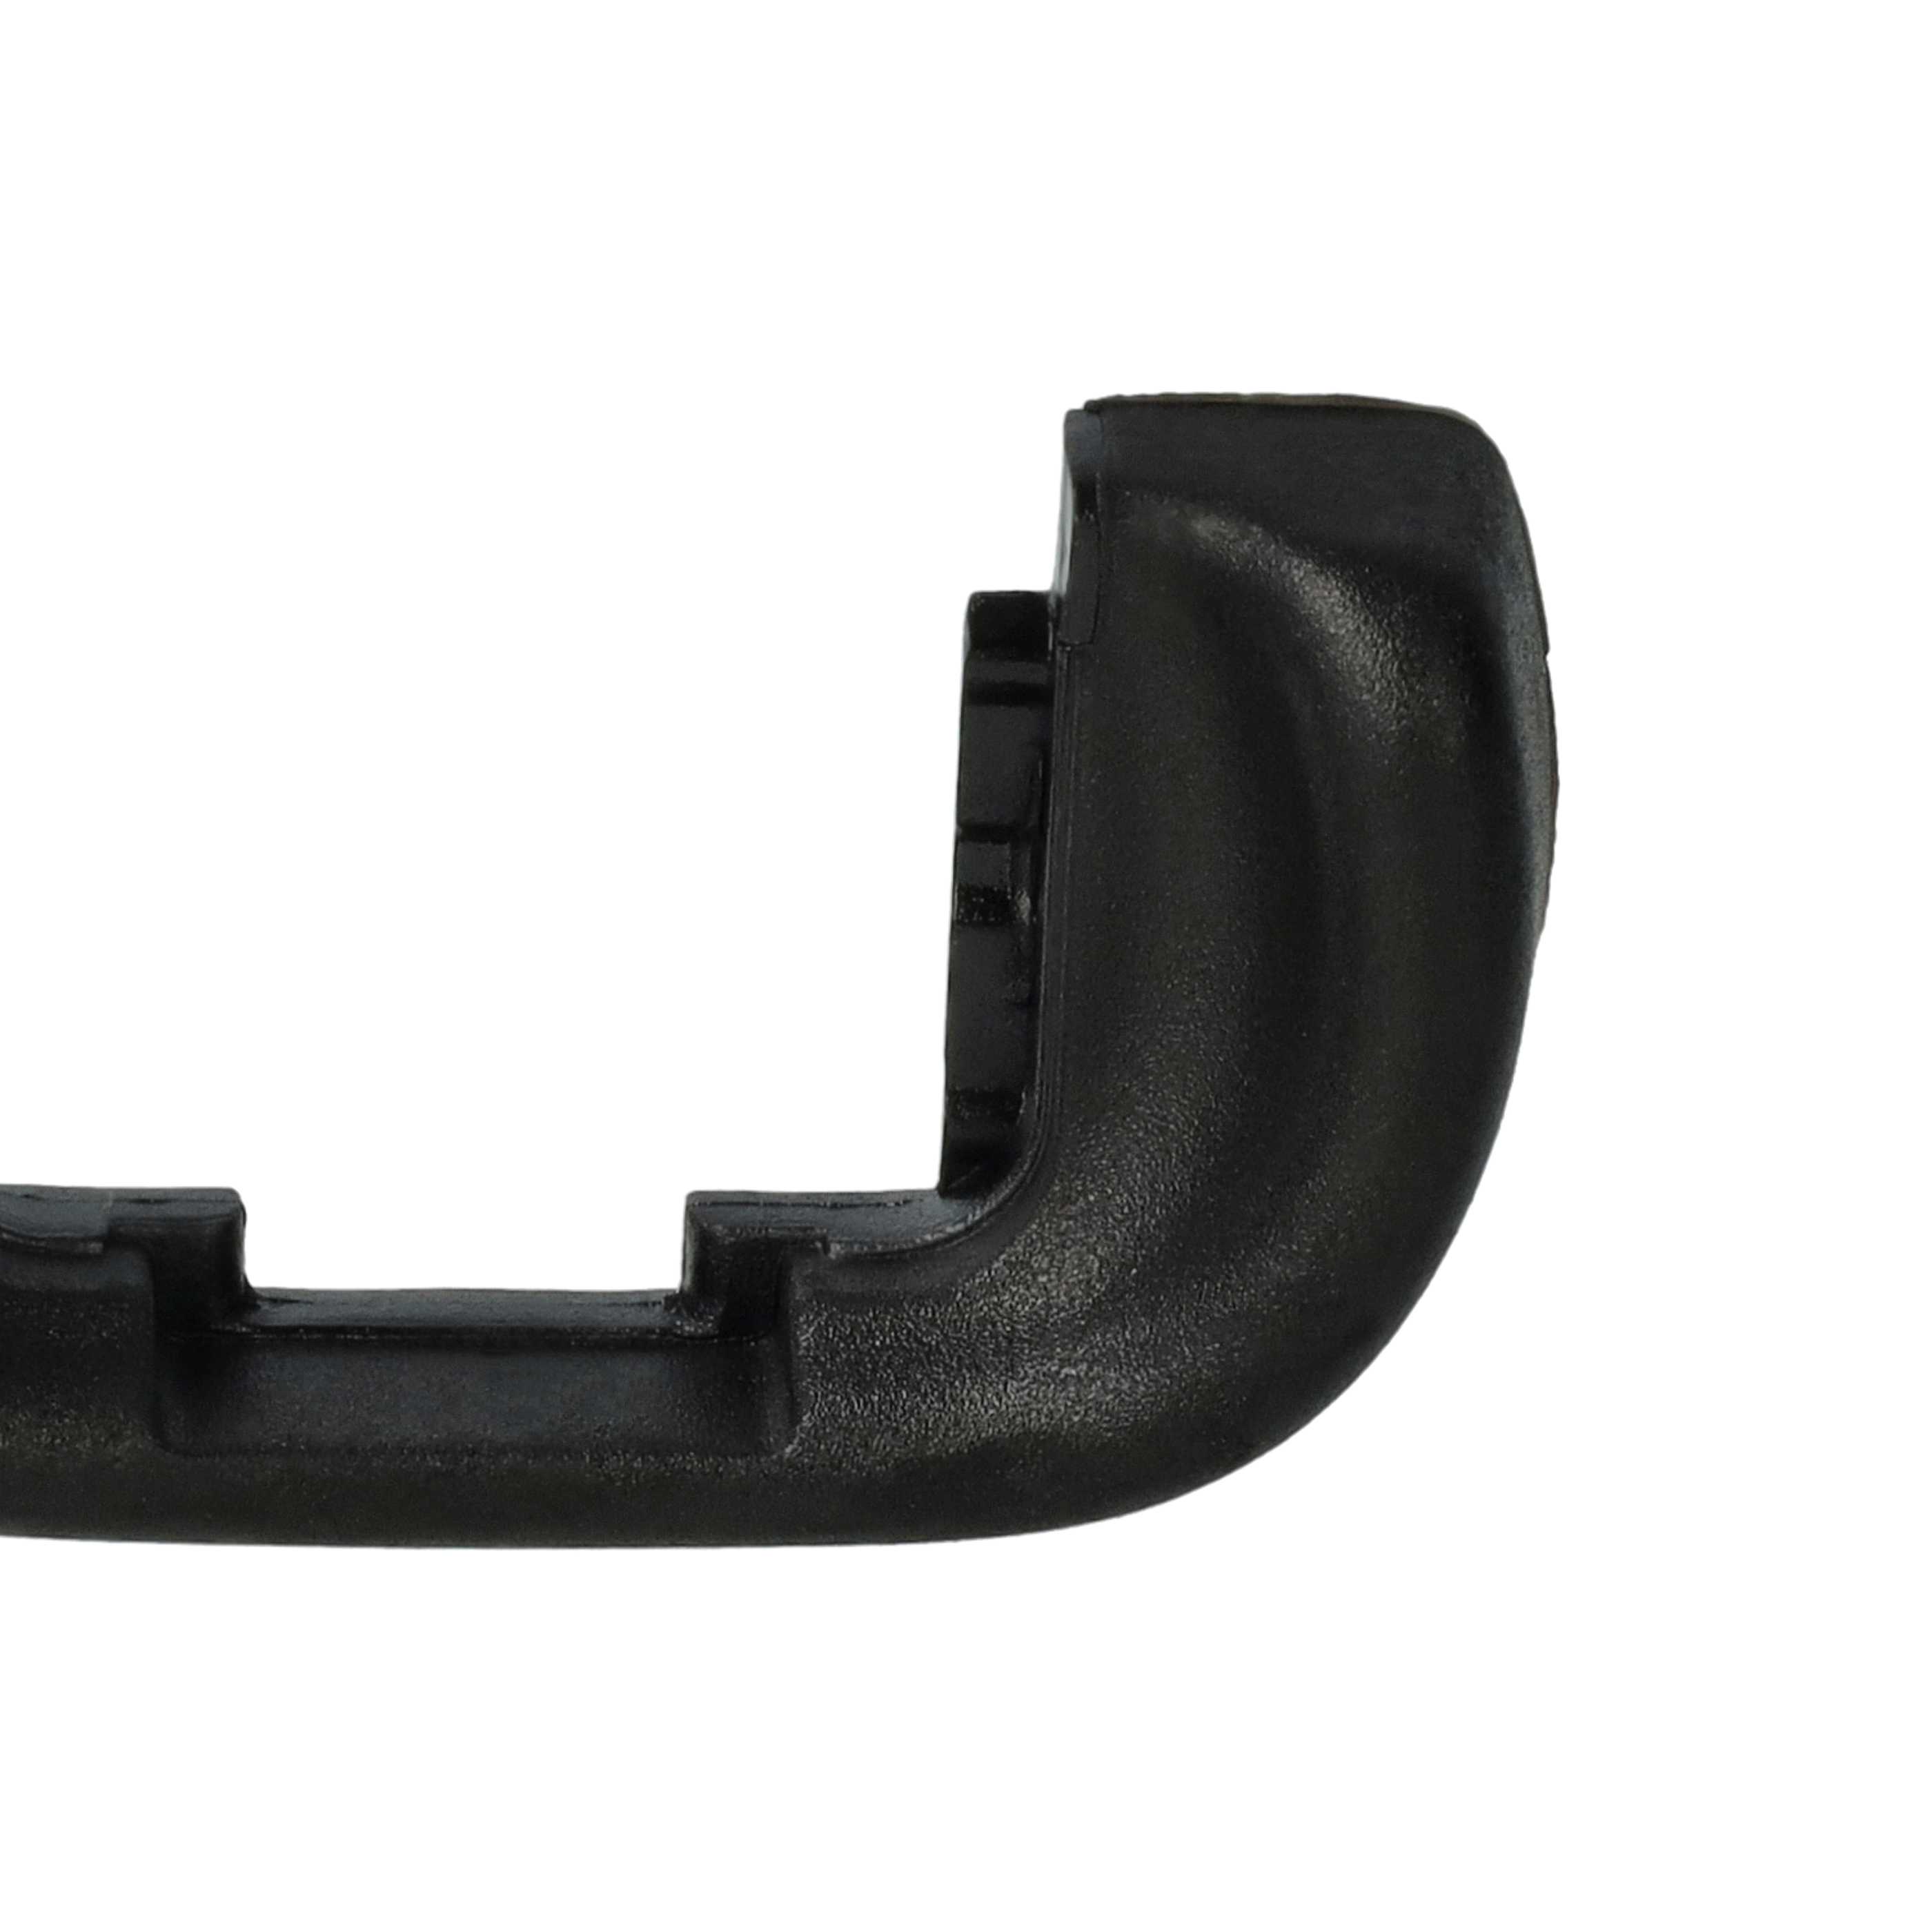 Eye Cup replaces Sony FDA-EP12 for Sony A7 Mark II etc., Plastic 